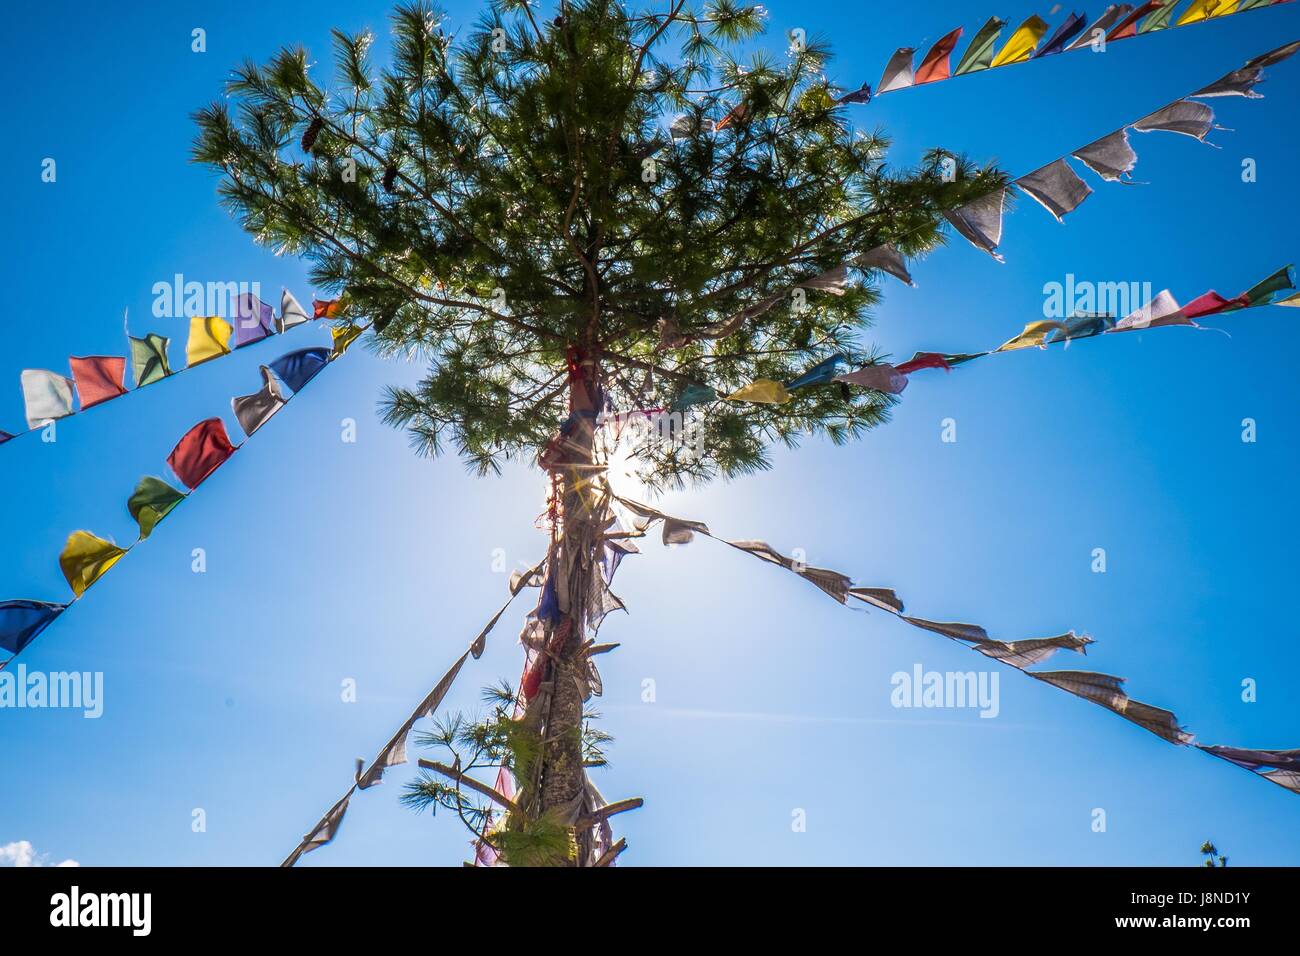 Morning sun rises behind tree with prayer flags. Stock Photo